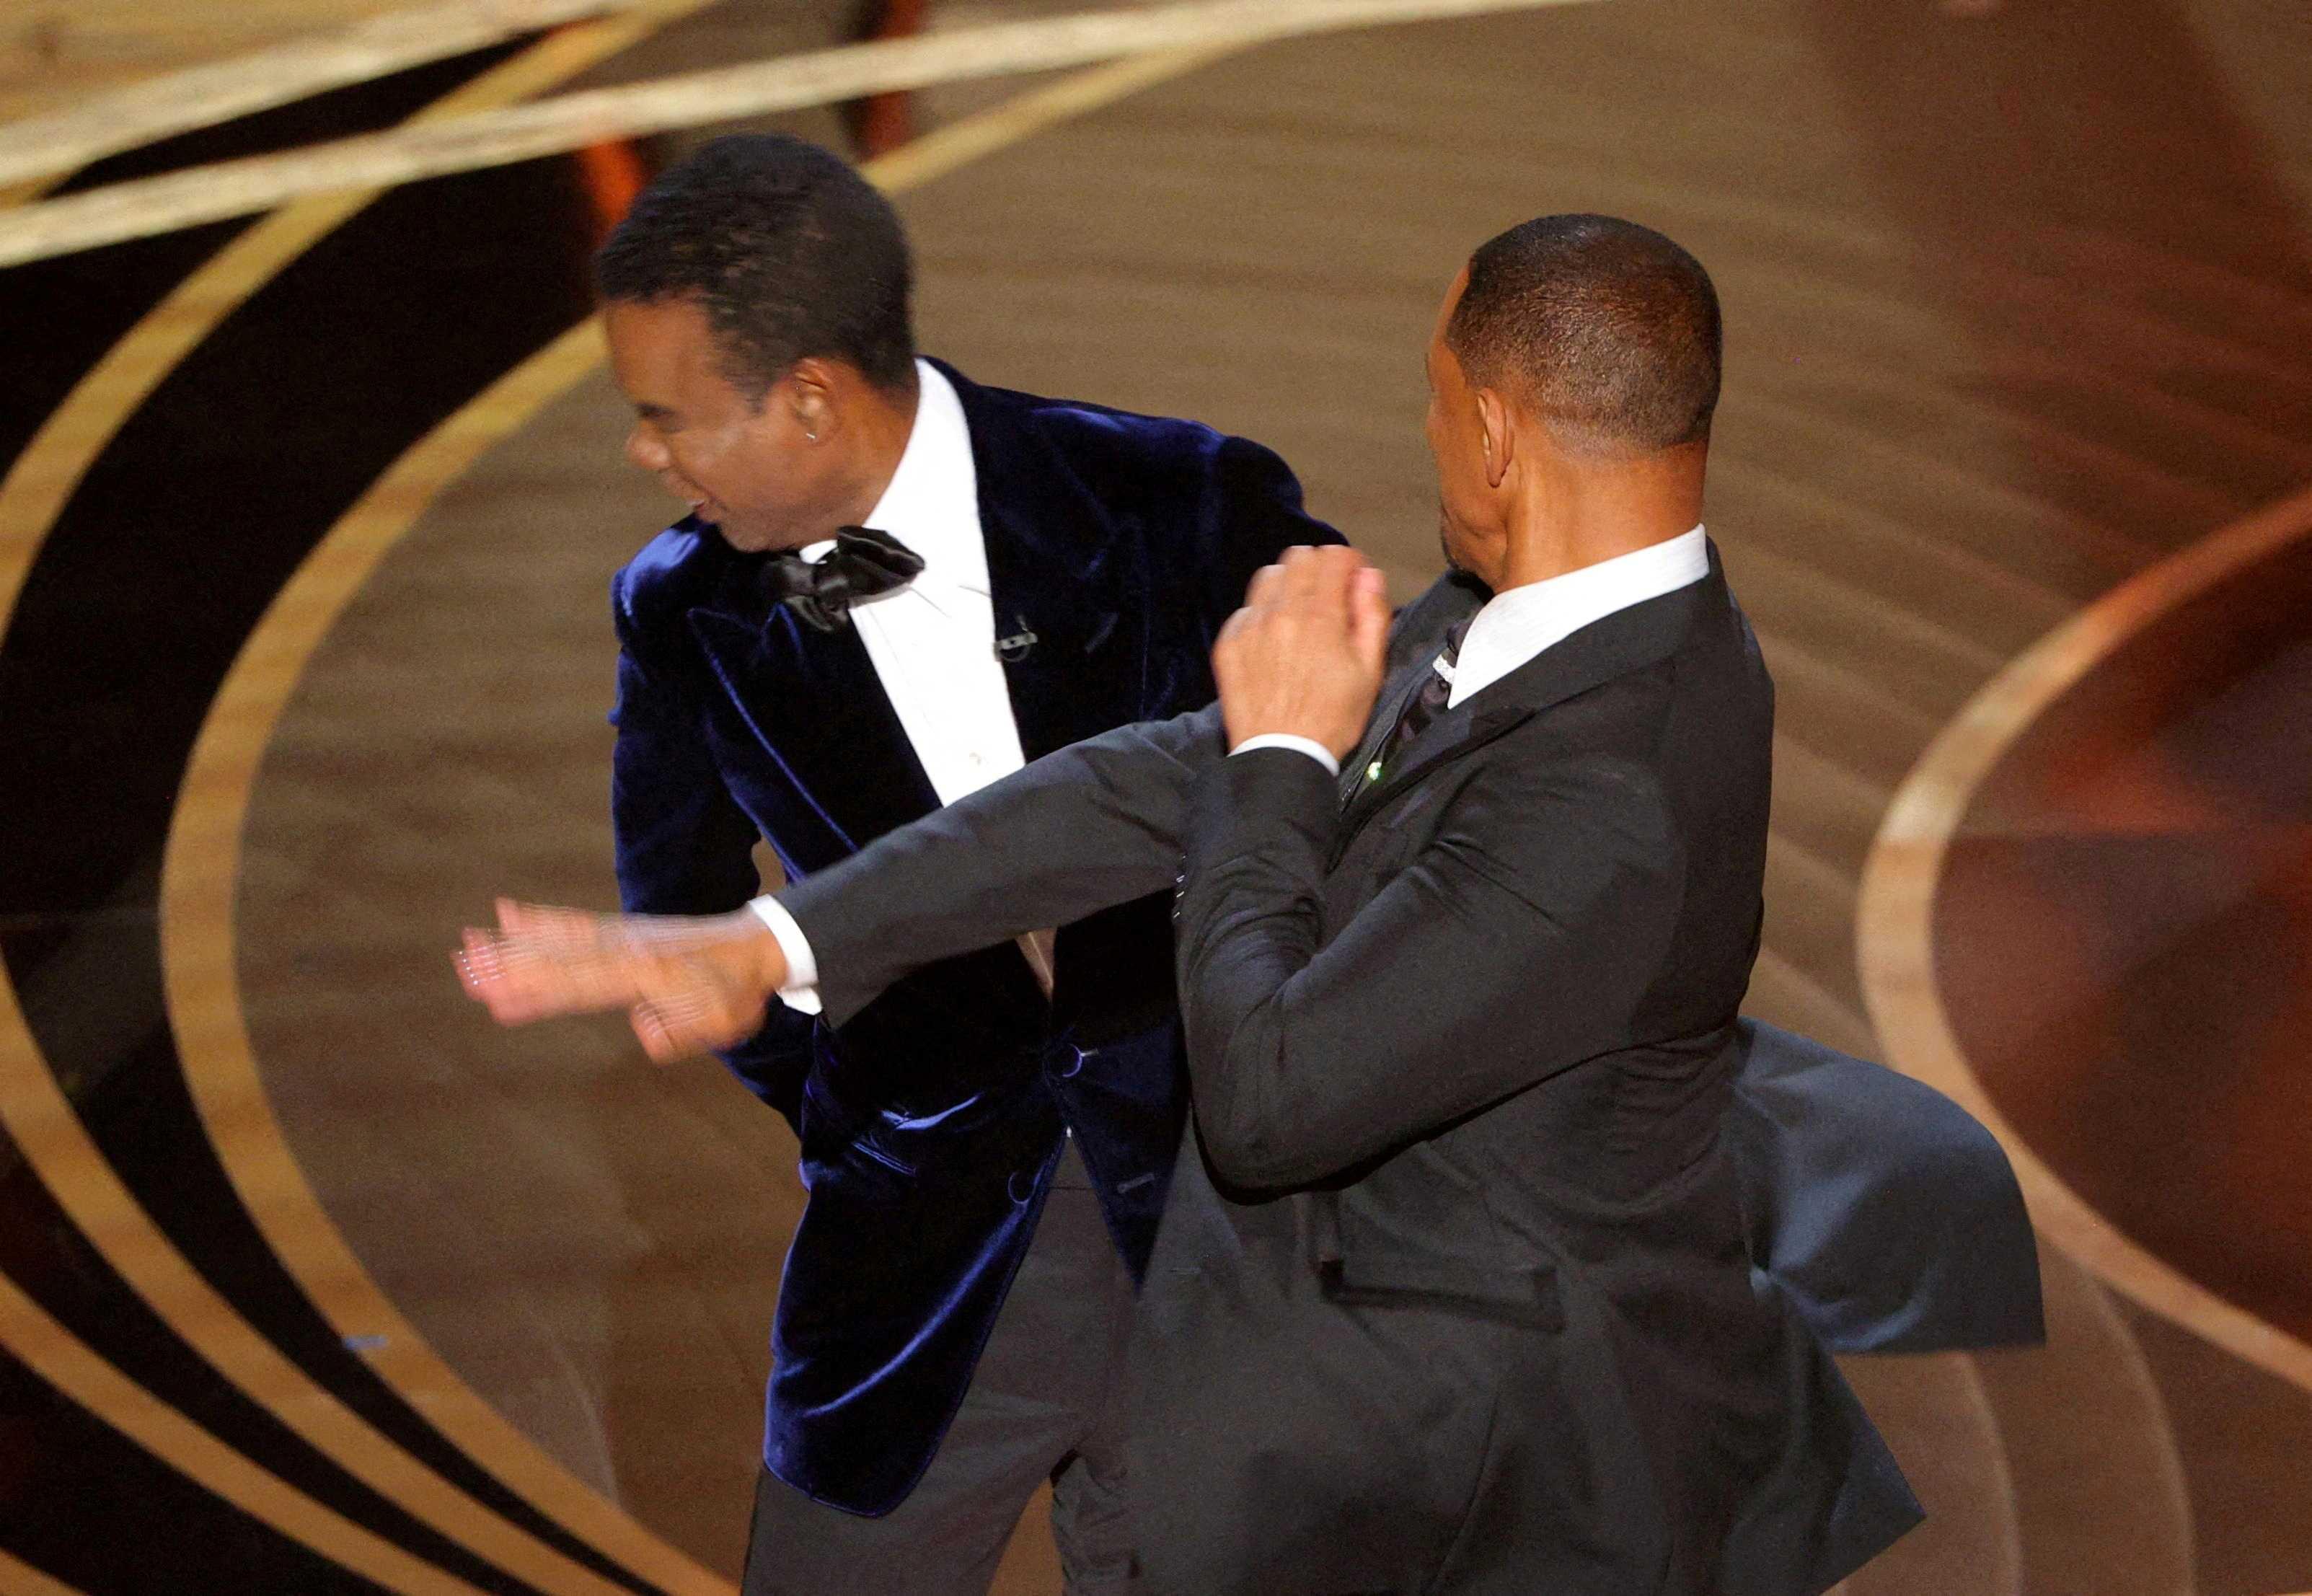 Will Smith hits Chris Rock onstage during the 94th Academy Awards in Hollywood, Los Angeles, California, US, March 27, 2022. Photo: Reuters